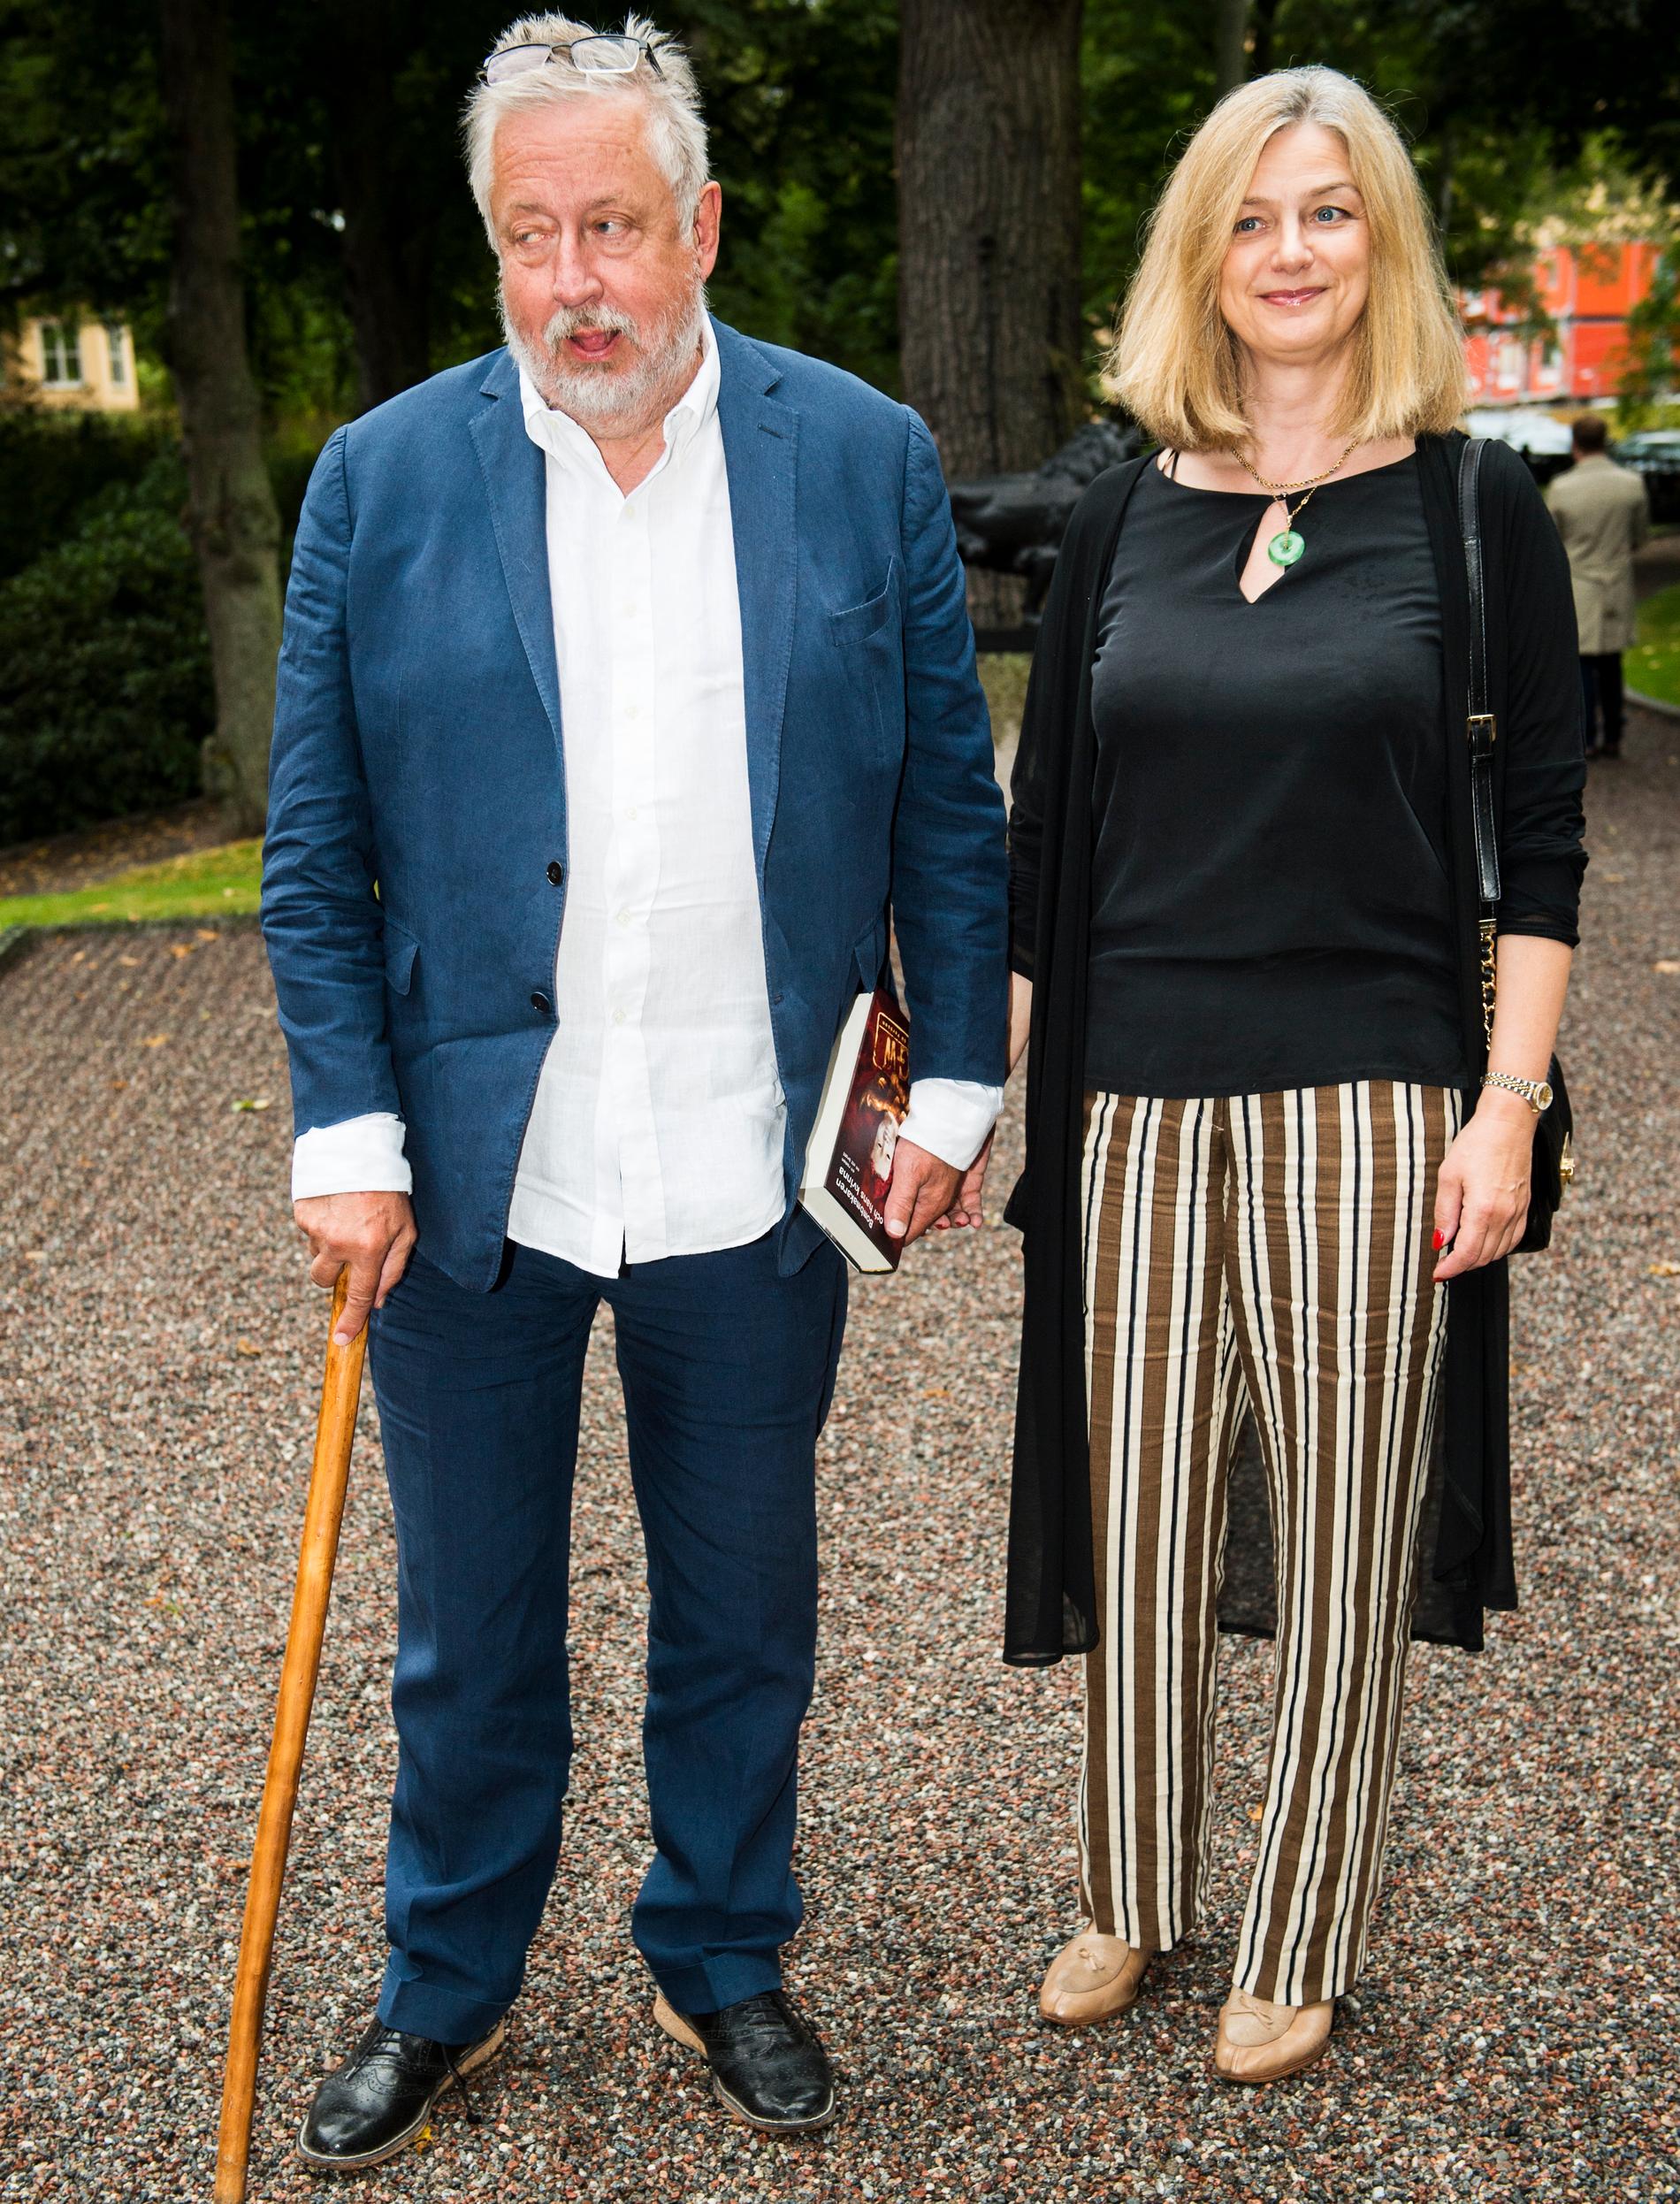 Leif GW Persson med frun Kim Persson.